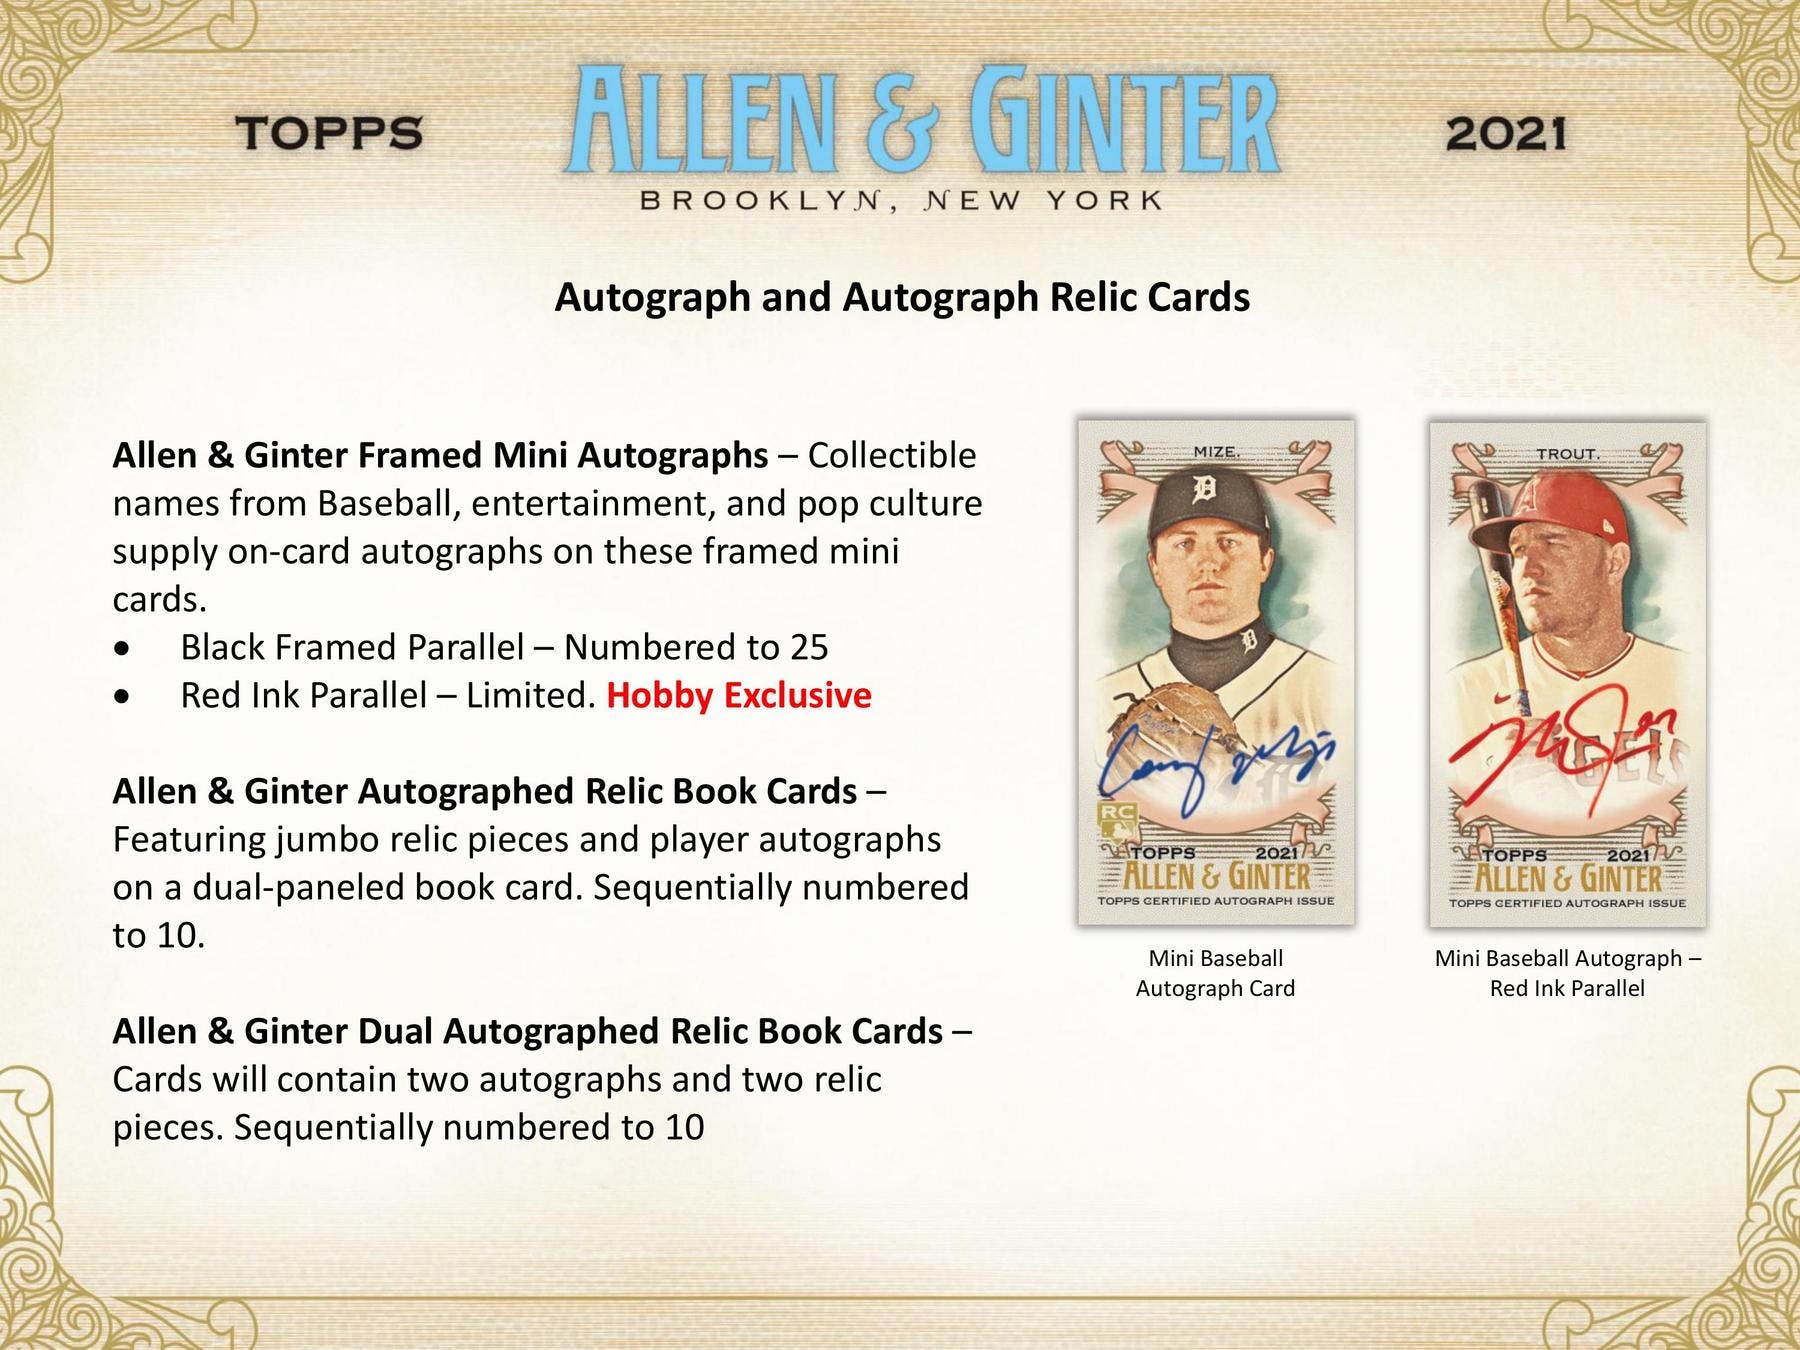 RELEASE DAY 2021 Topps Allen & Ginter Baseball Case PICK YOUR PRICE